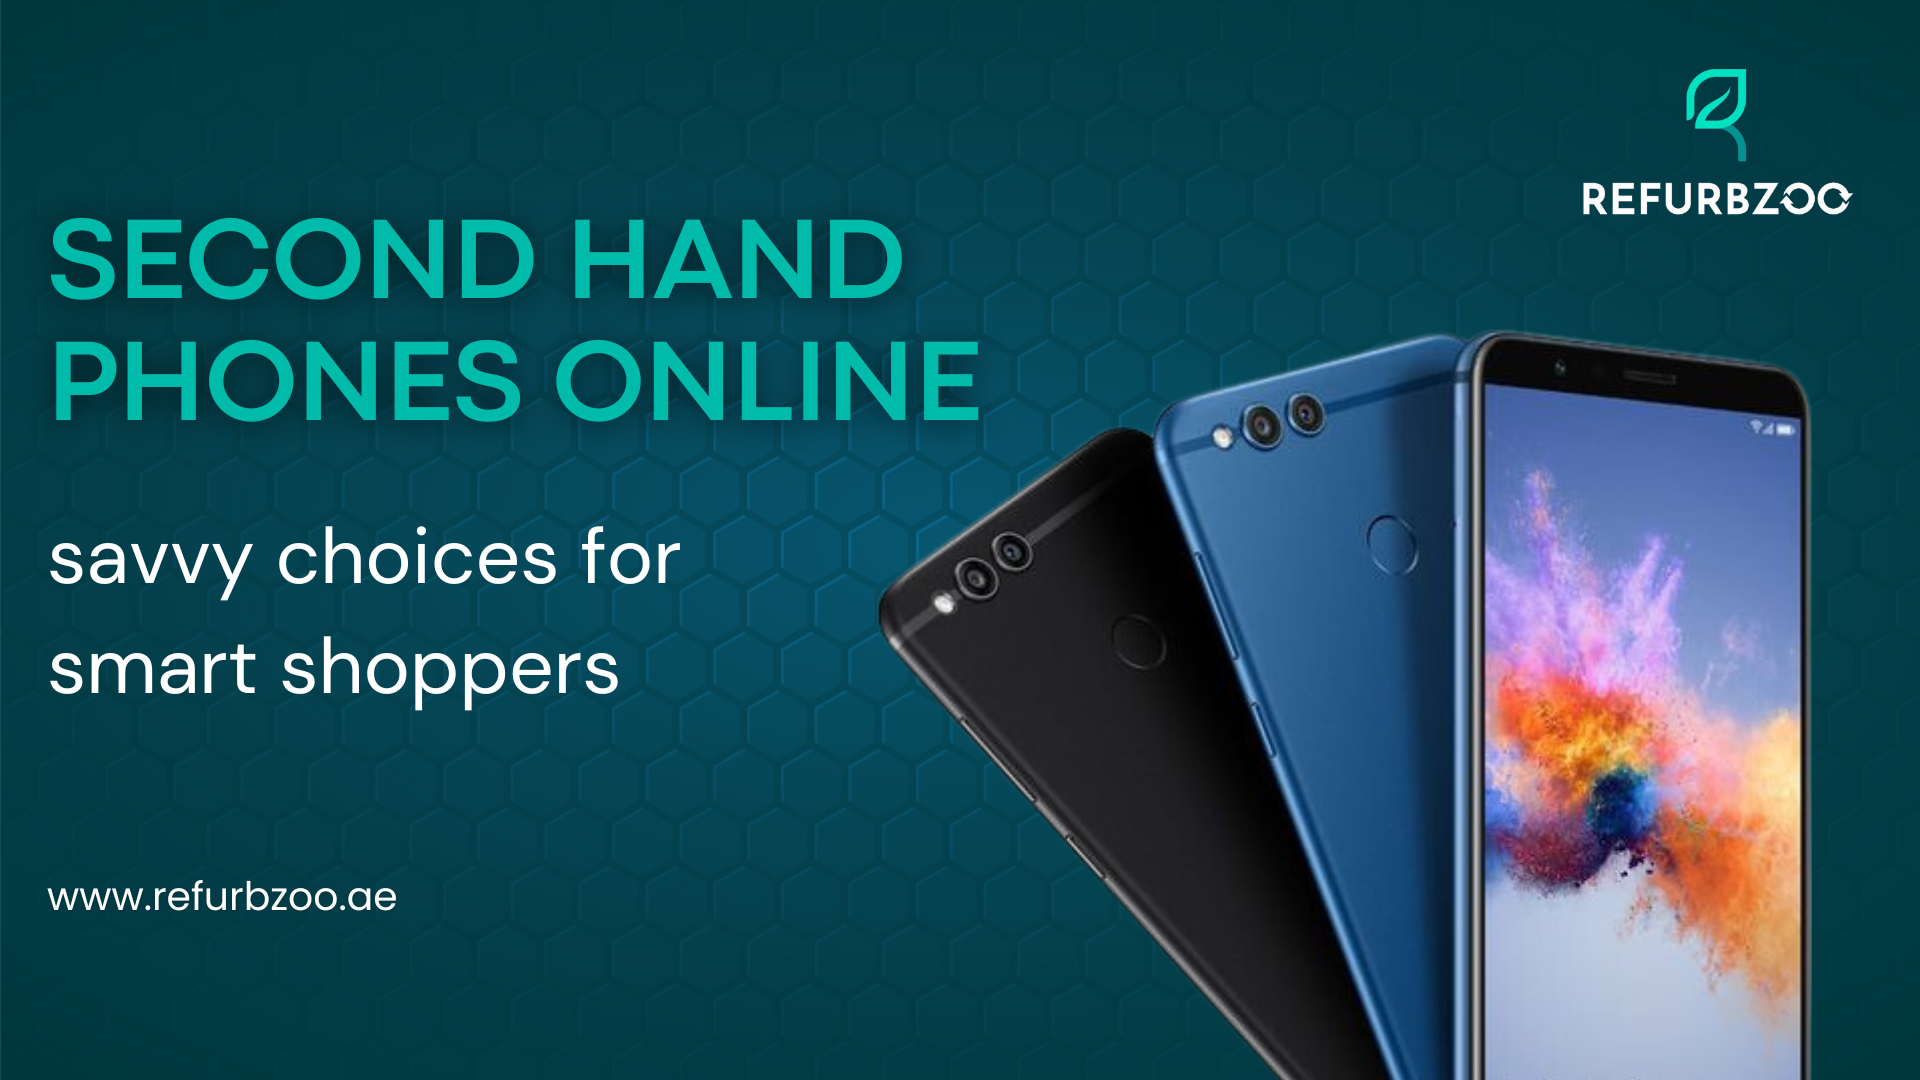 Second Hand Phones Online: Savvy Choices For Smart Shoppers